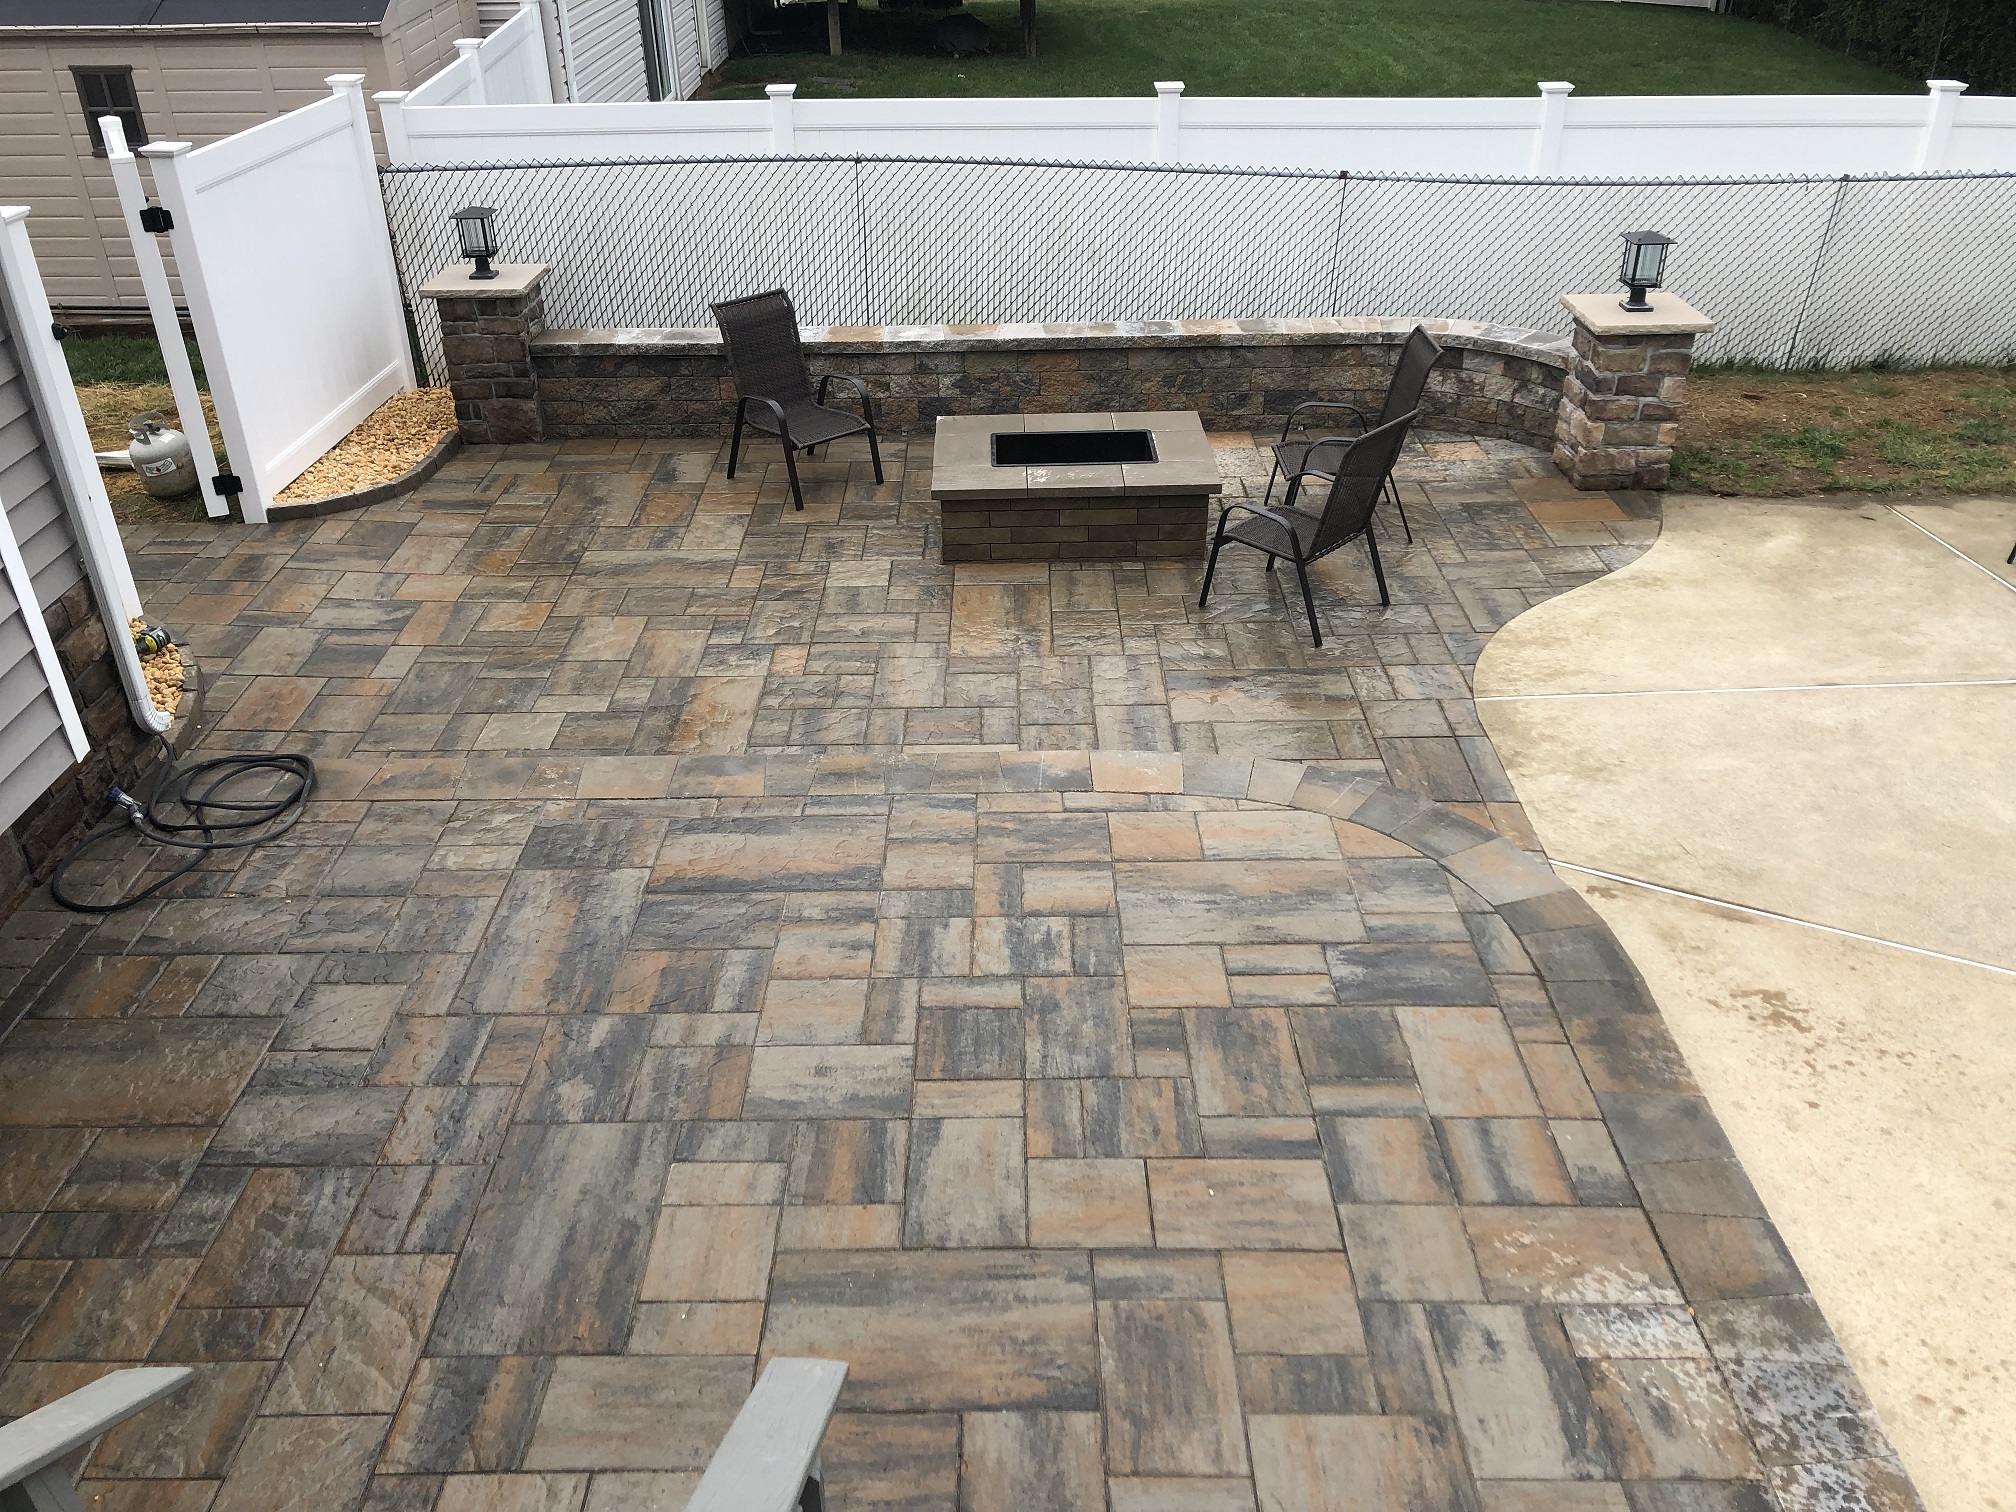 Complete paver patio and outdoor firepit